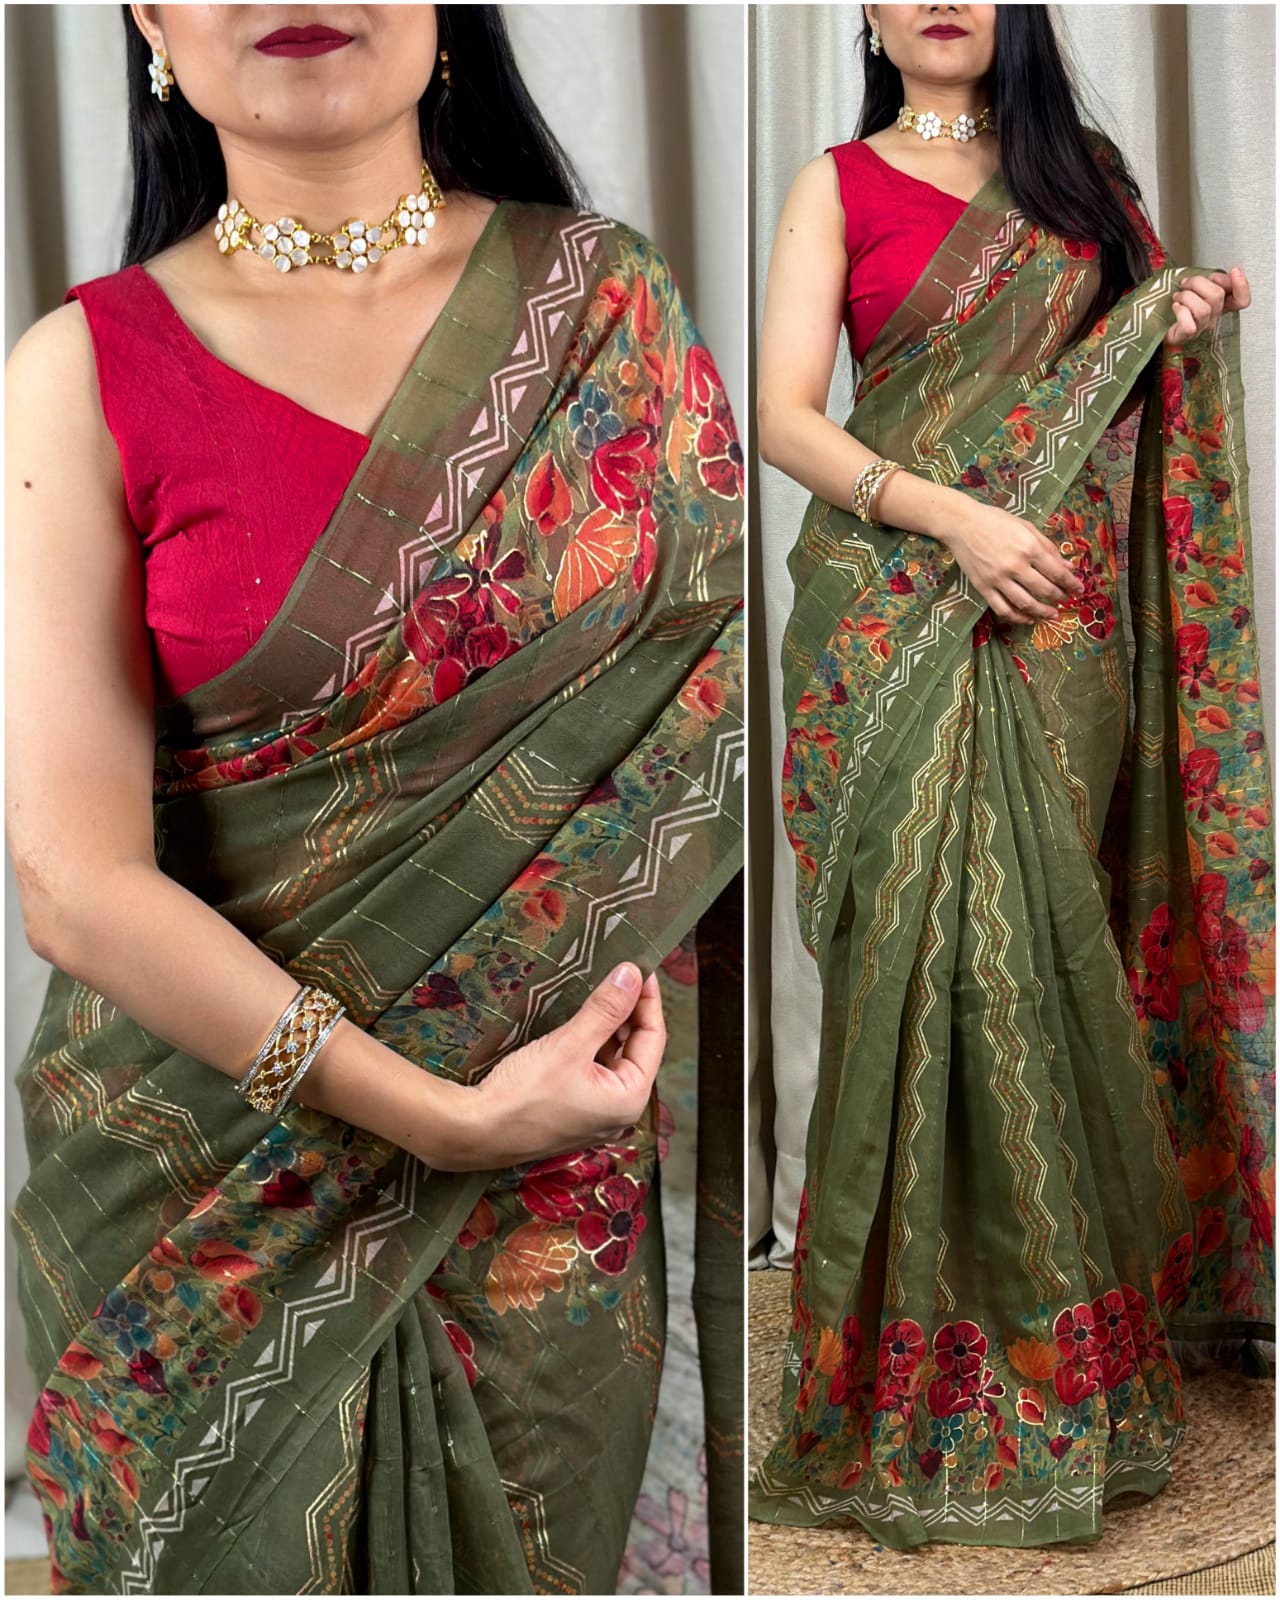 Designer floral print saree with self-jacquard blouse, sequin weaving, golden foil outing, and tussles in the pallu.